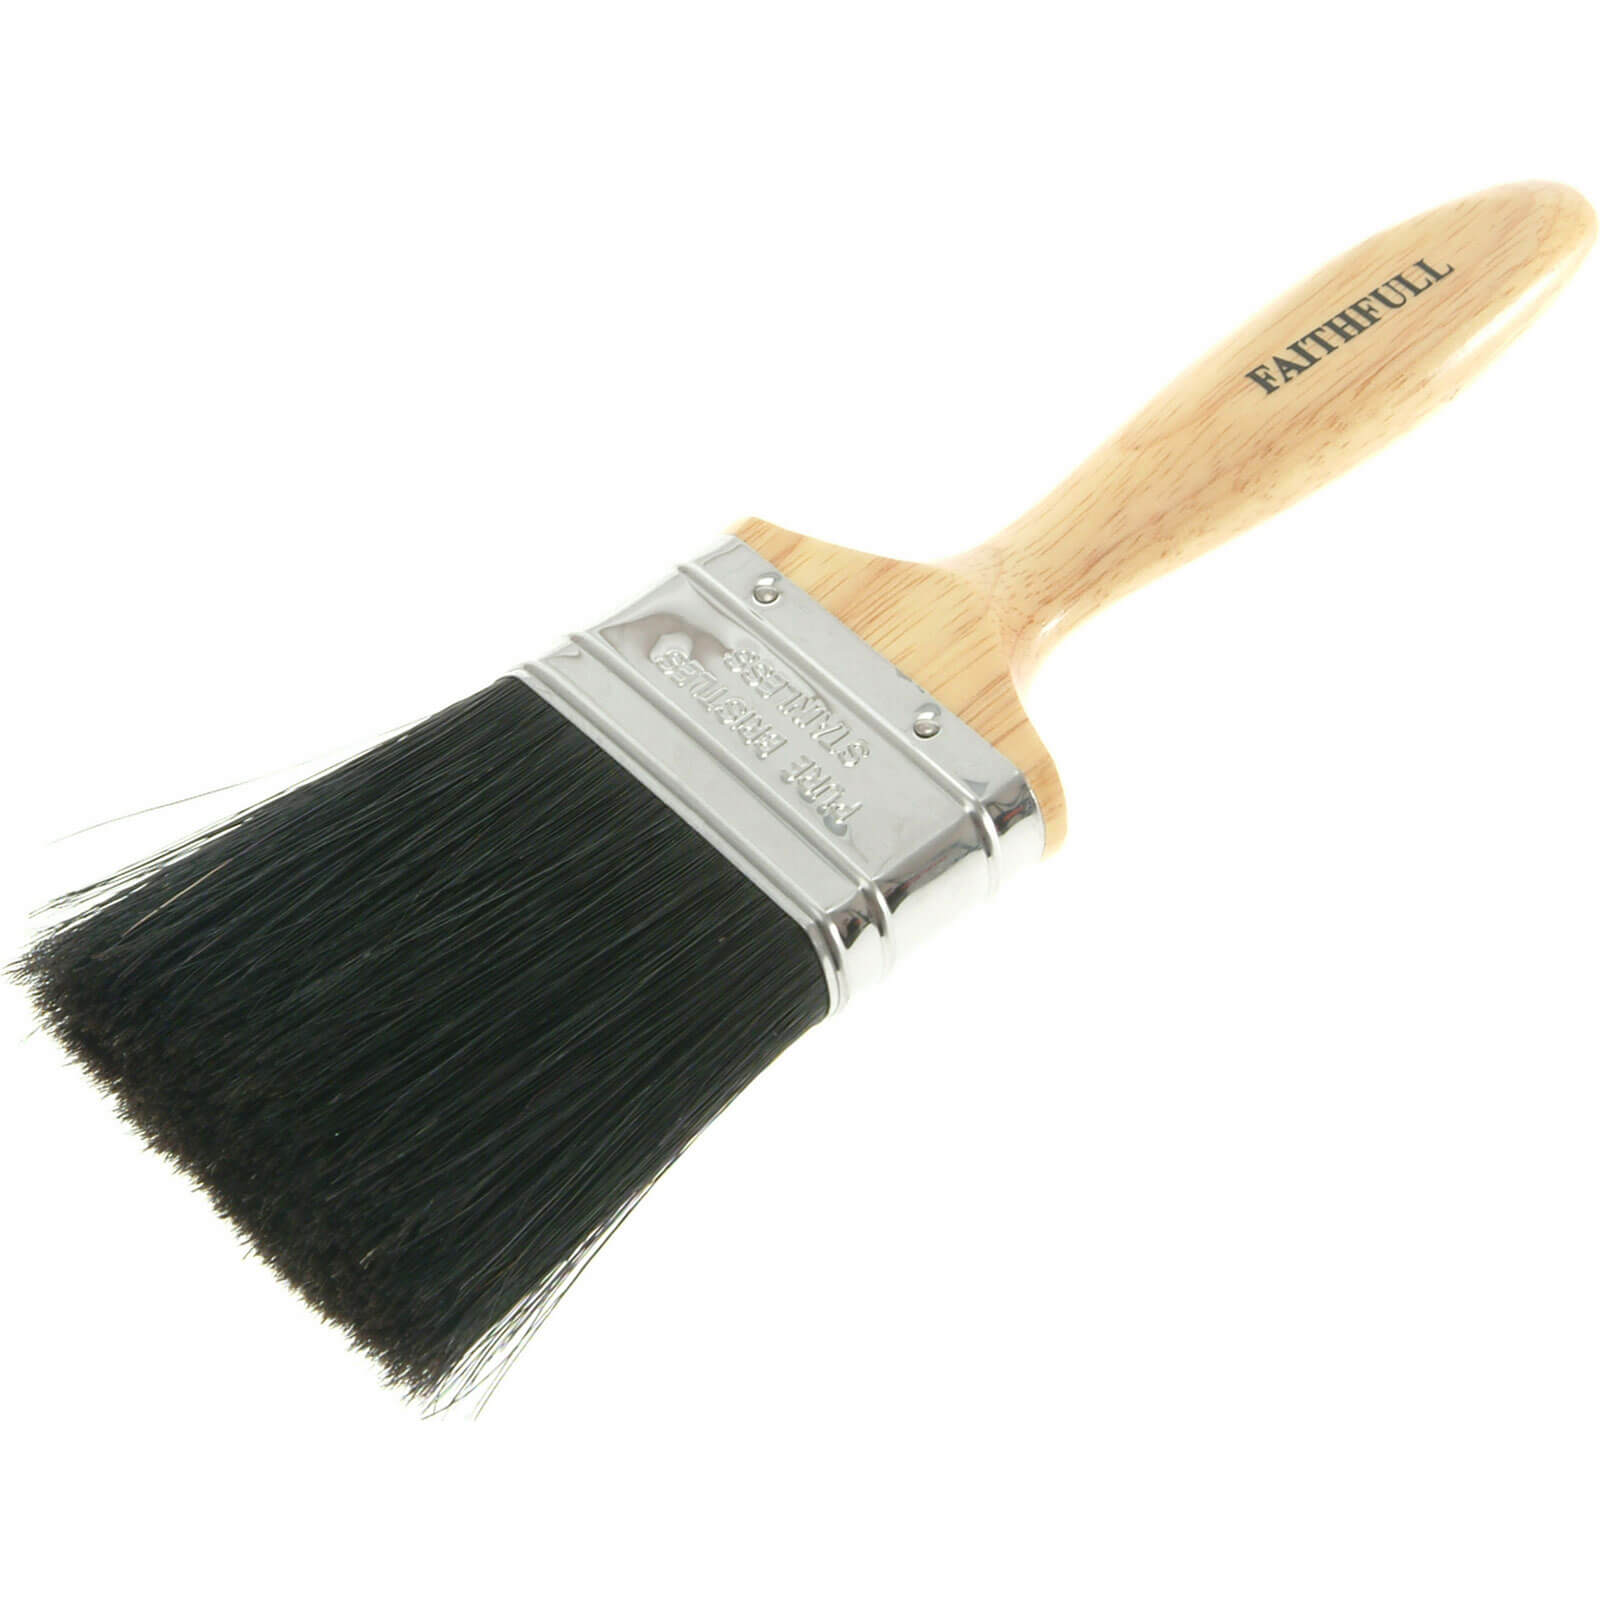 Photos - Putty Knife / Painting Tool Faithfull Contractors Paint Brush 65mm 